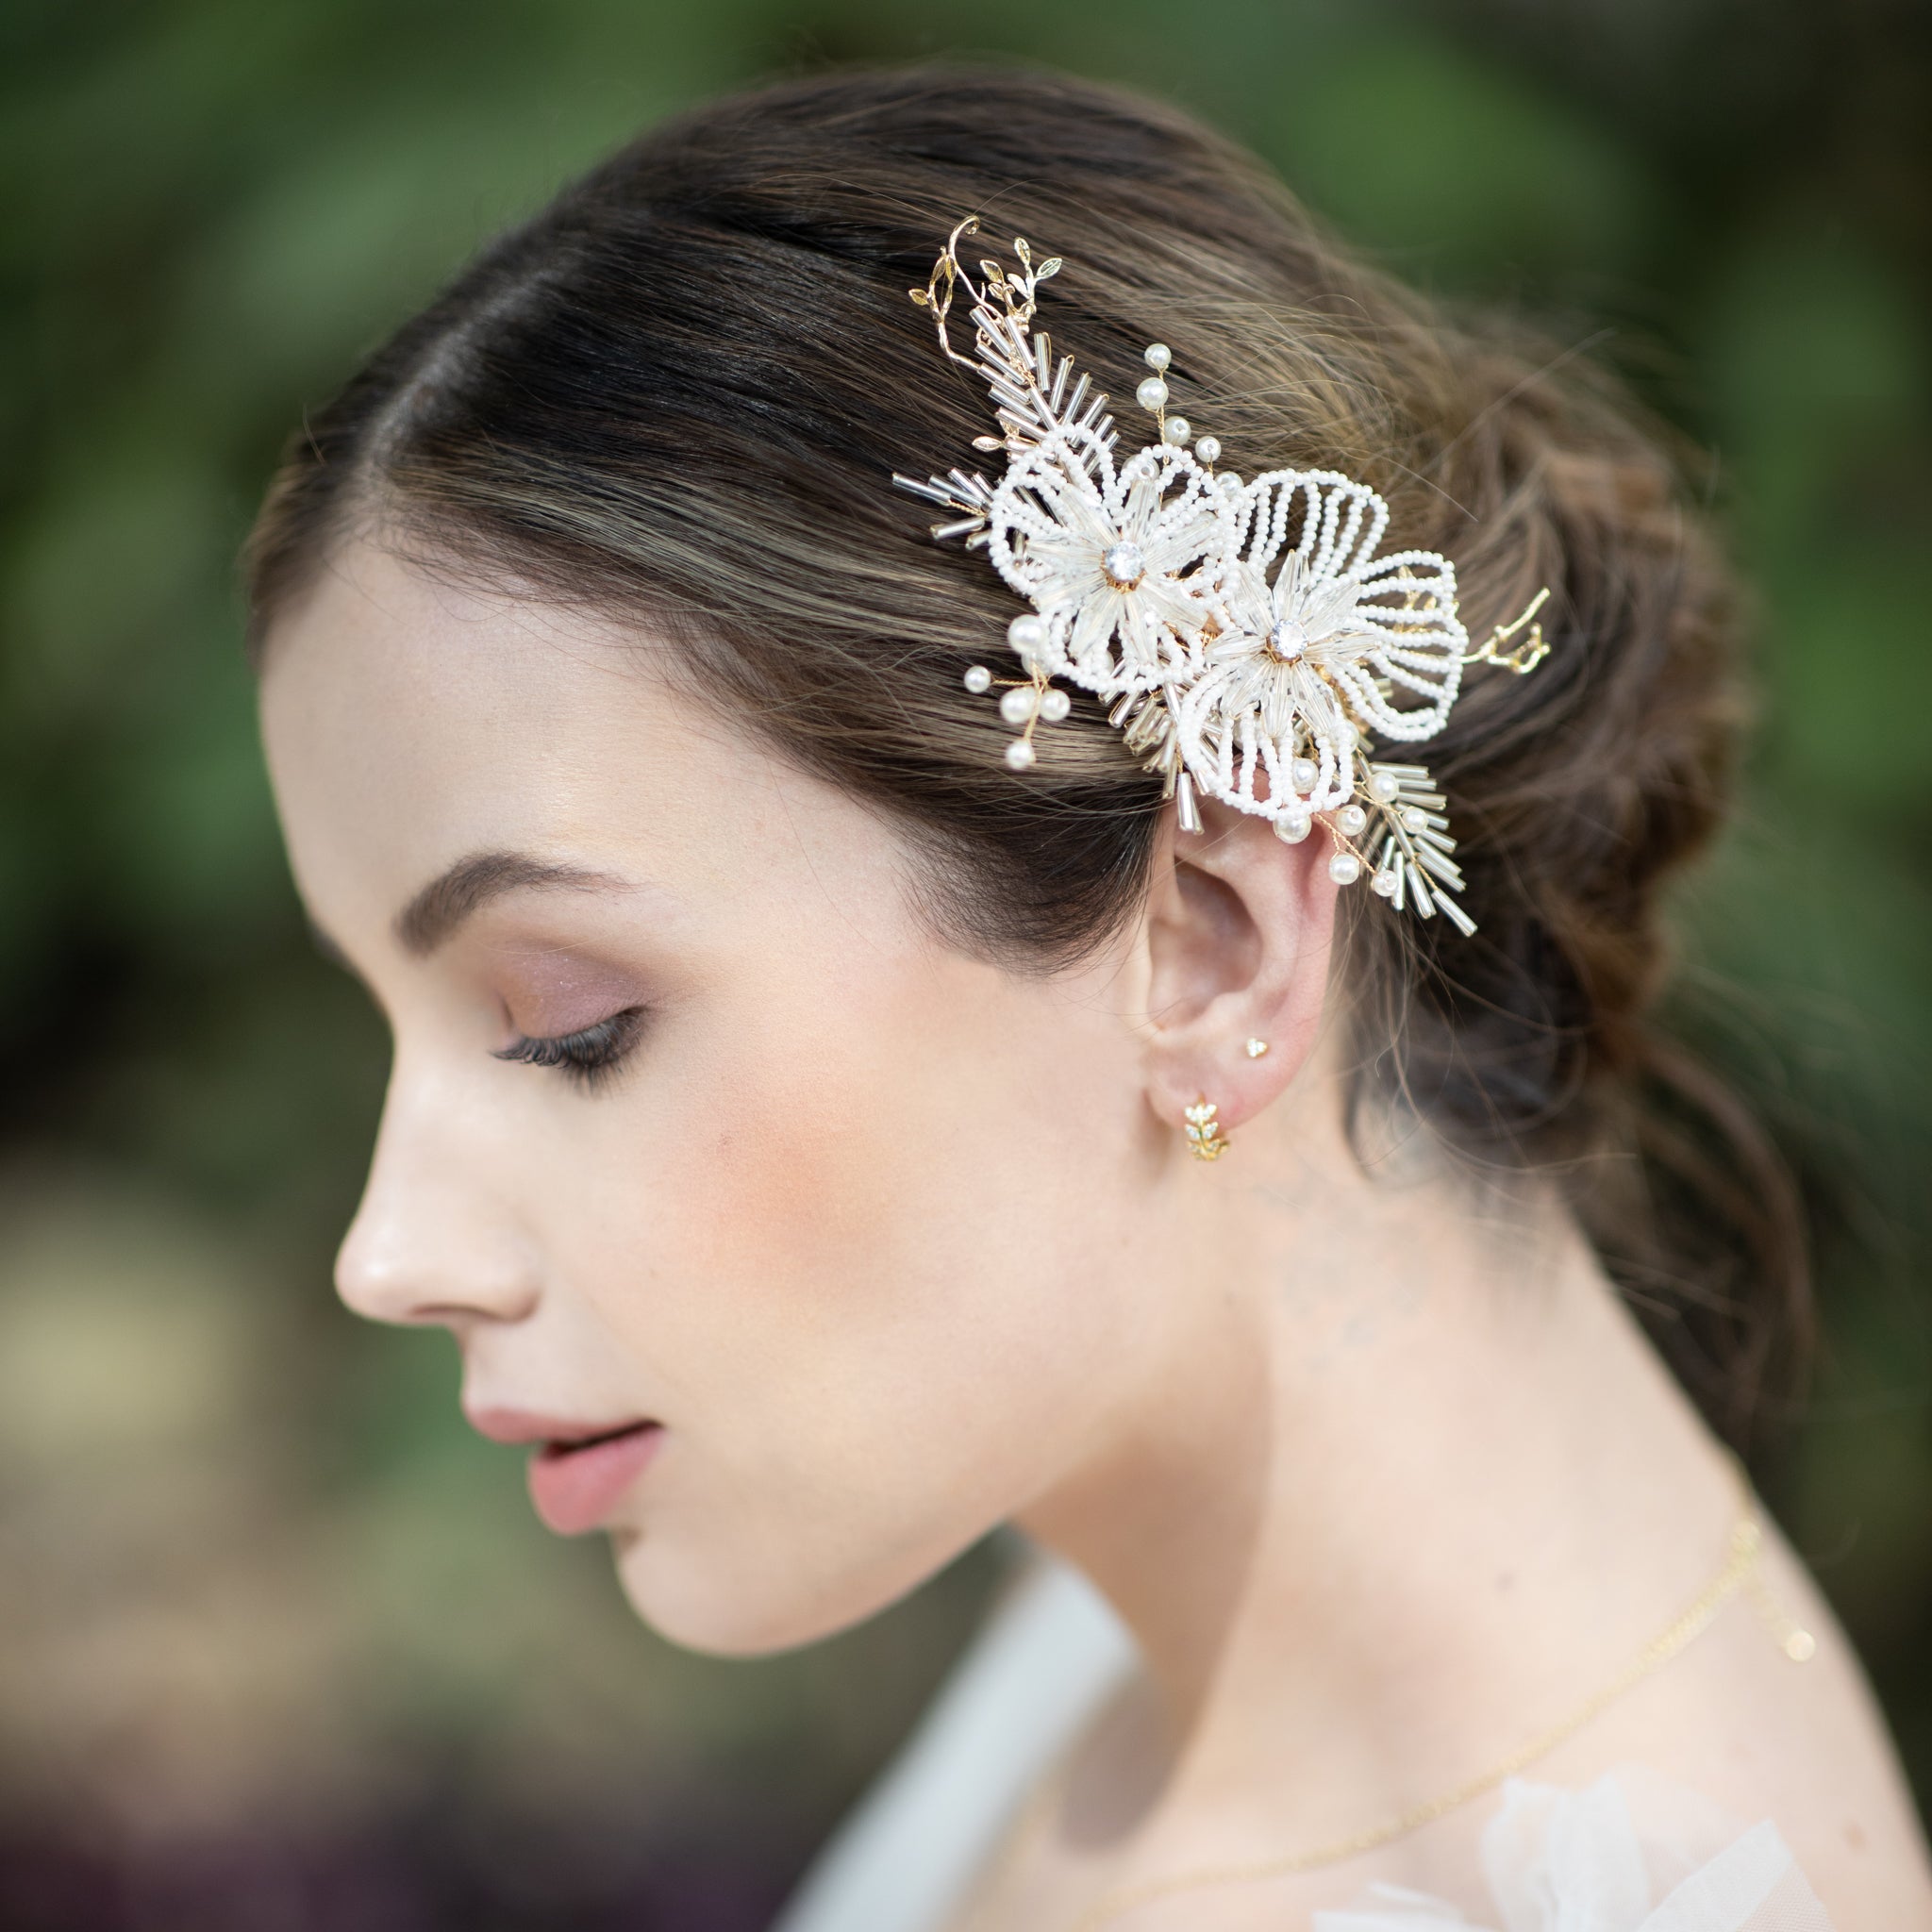 Christmas Hair Accessories | Gift Guide | Tegen Accessories Blog